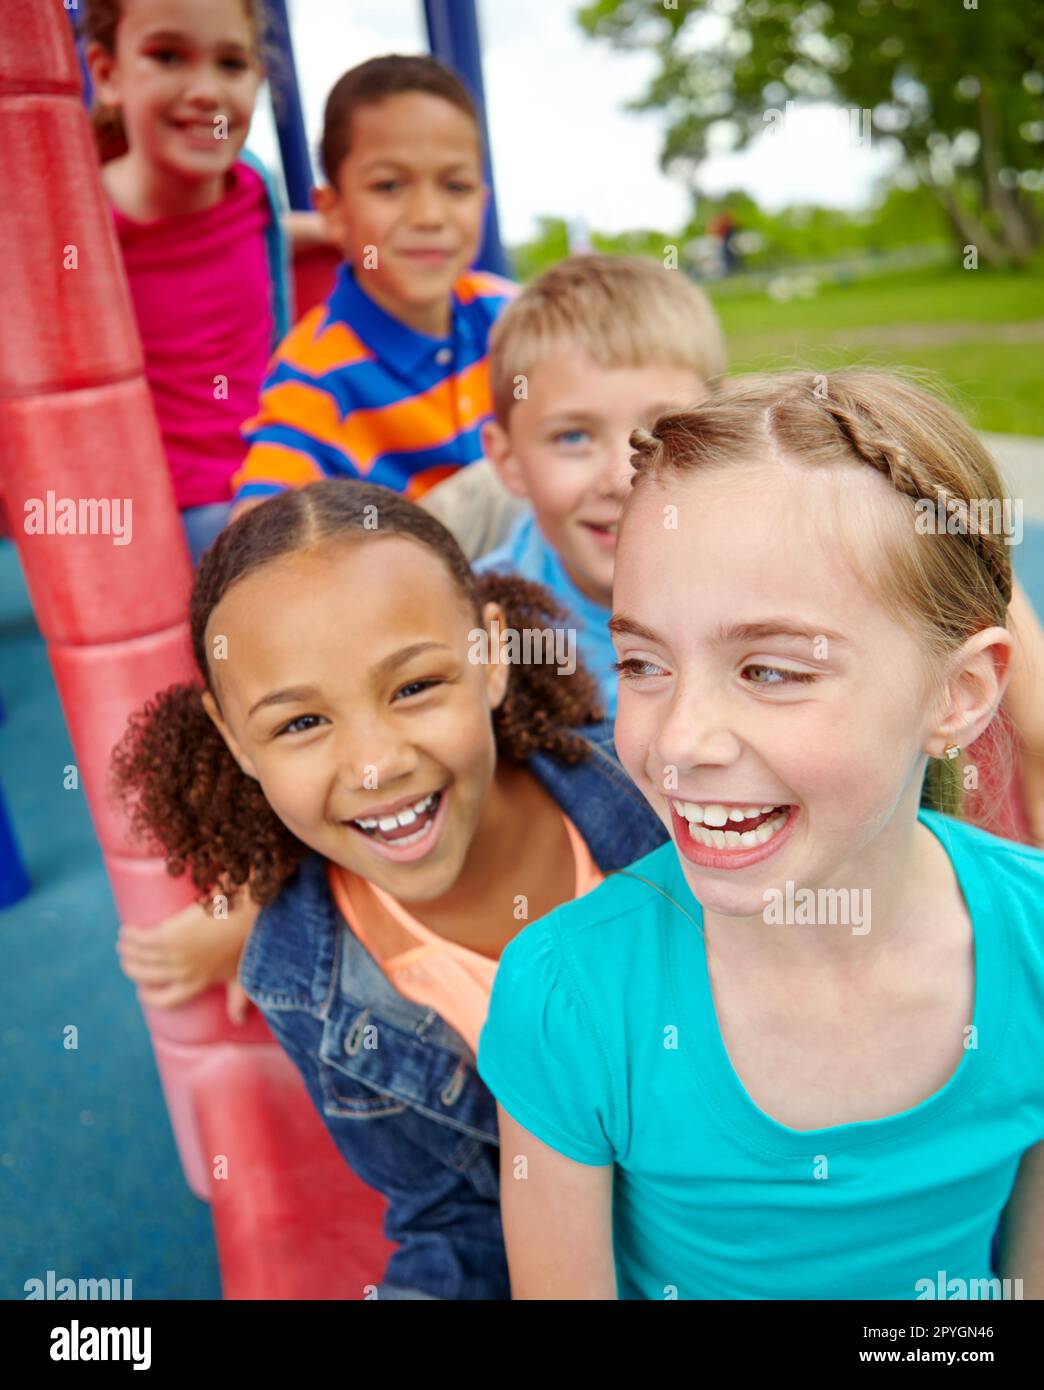 Enjoying time spent together. A happy group of multi-ethnic children sitting happily on a slide in a play park. Stock Photo